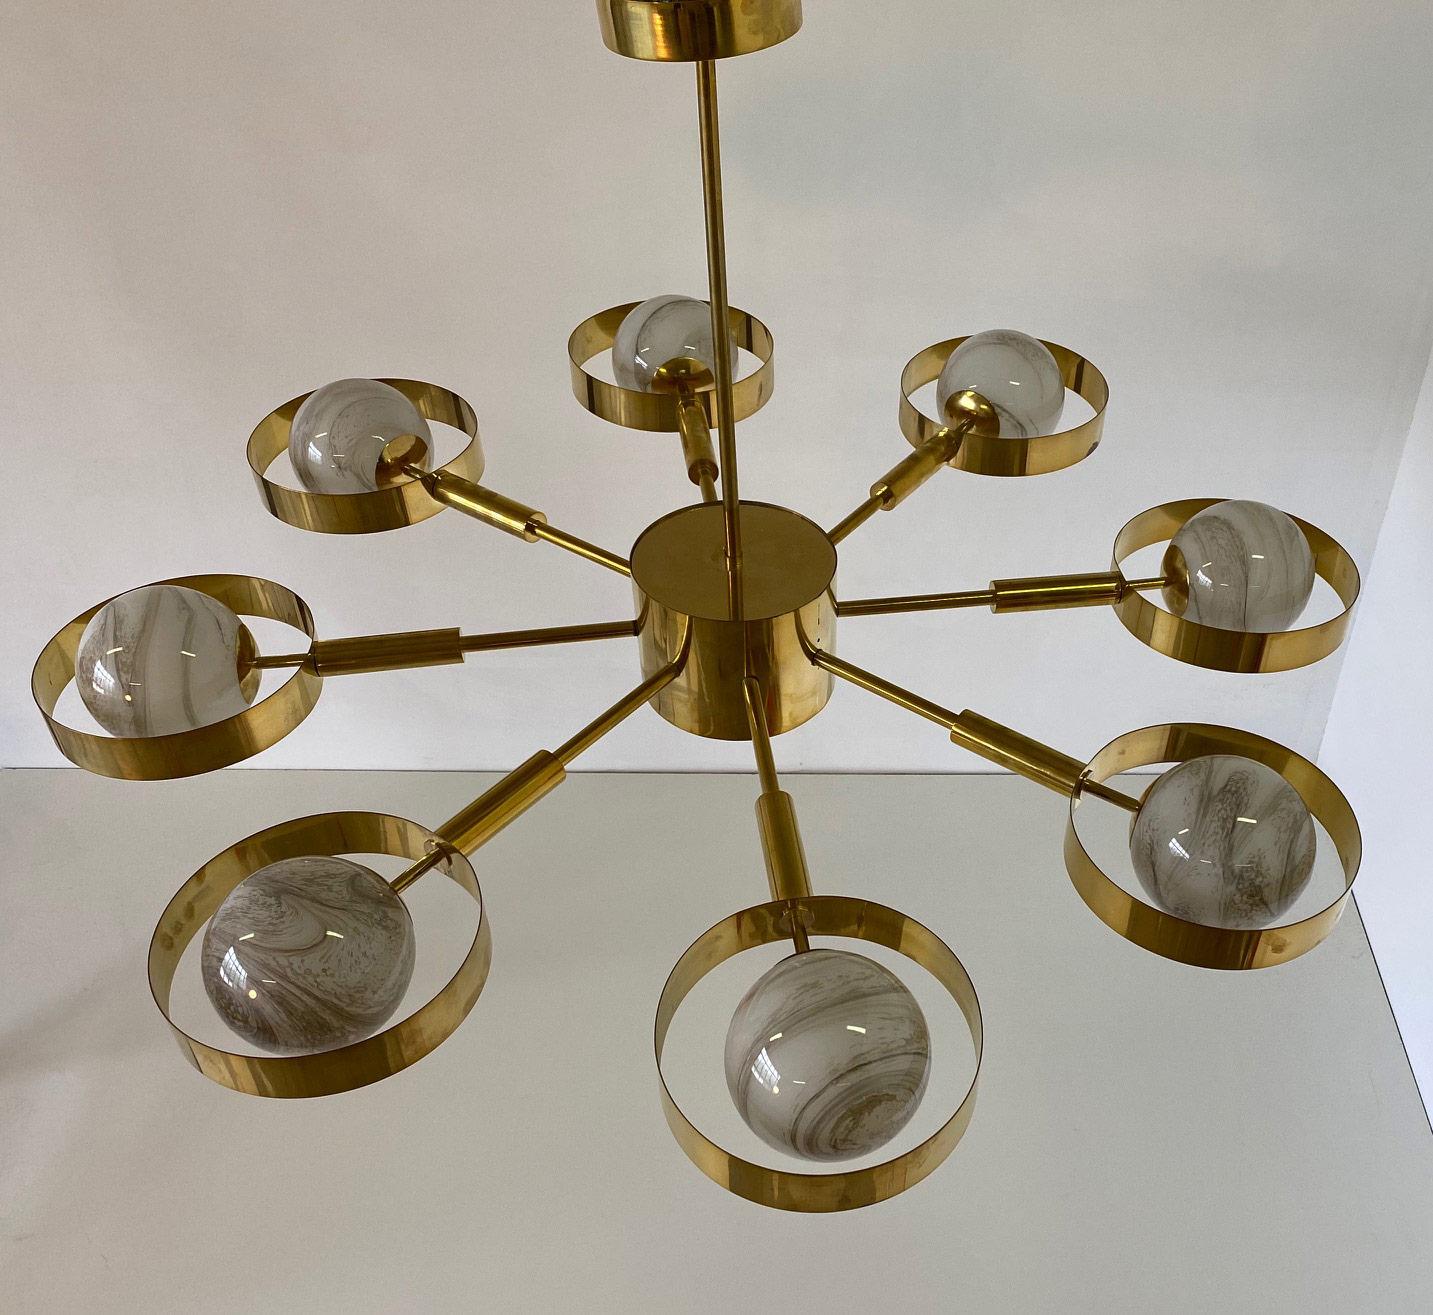 Italian Art Deco Murano colored glass on a brass structure, produced in Italy, in Murano by master glass craftsmen.